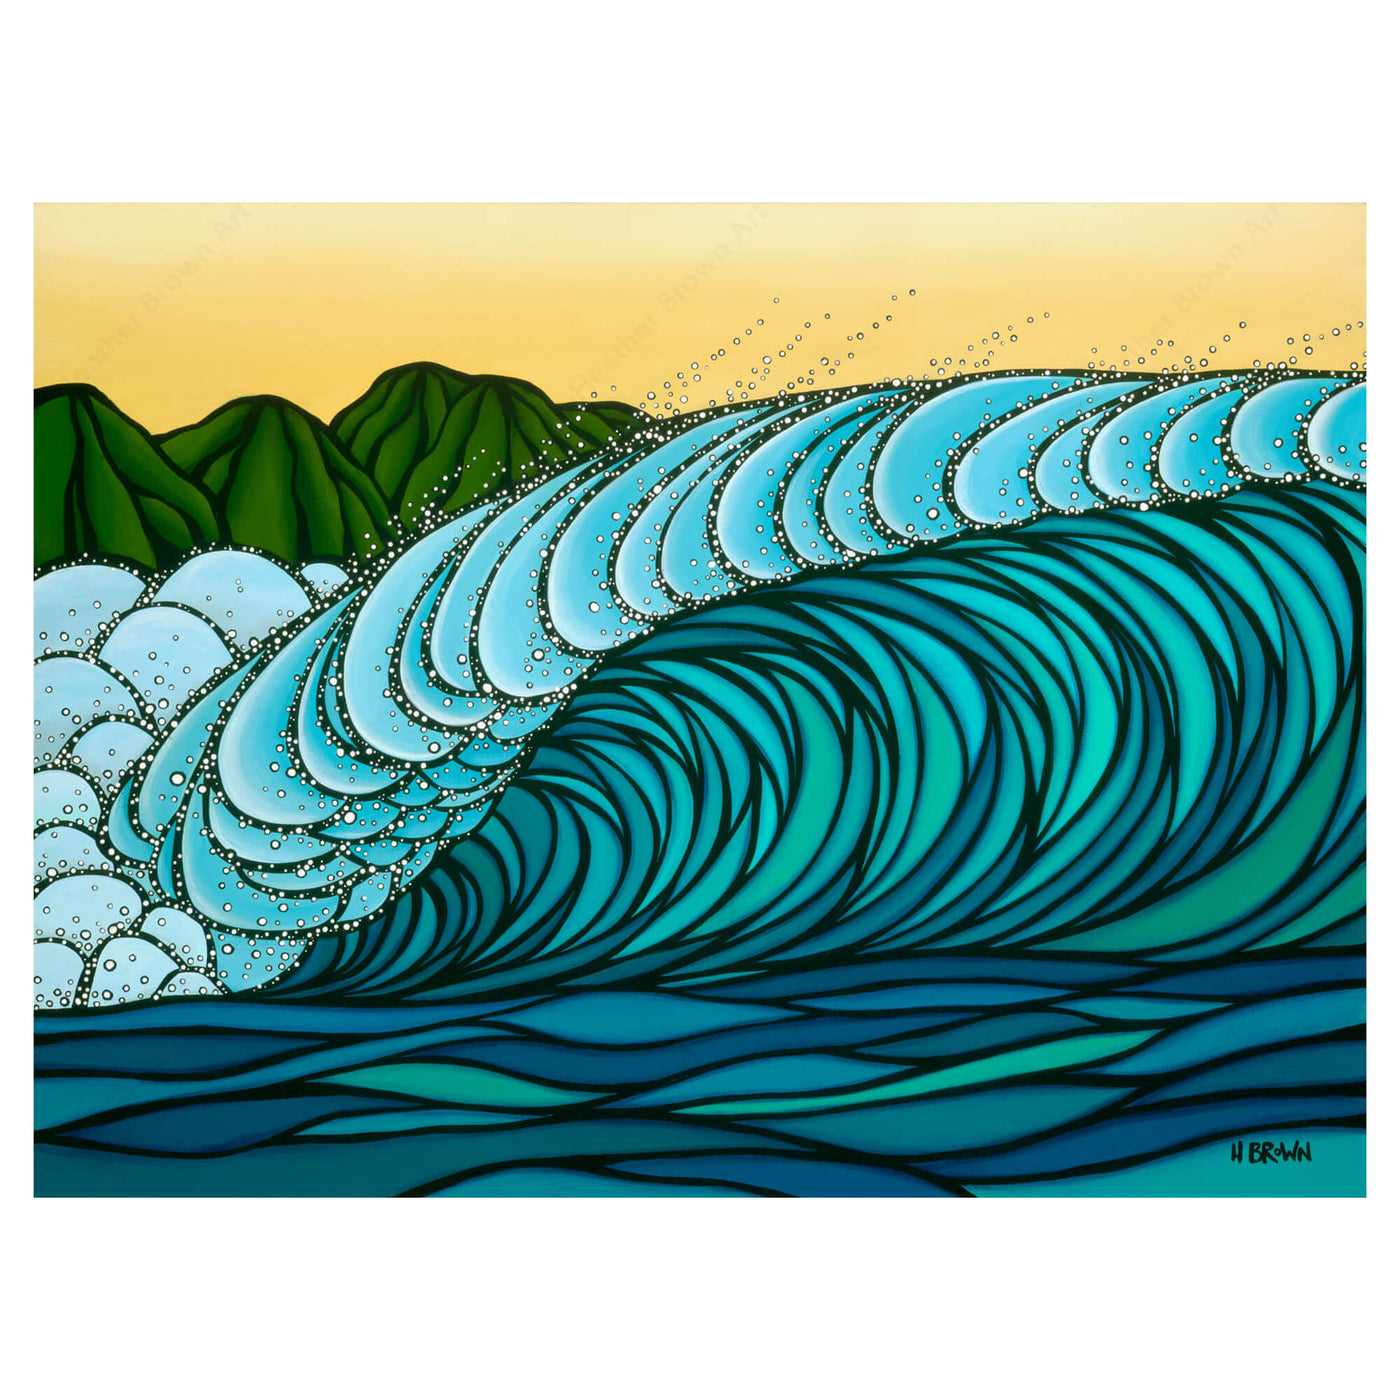 A matted art print featuring waves through bold blues and distant green mountains by Hawaii surf artist Heather Brown